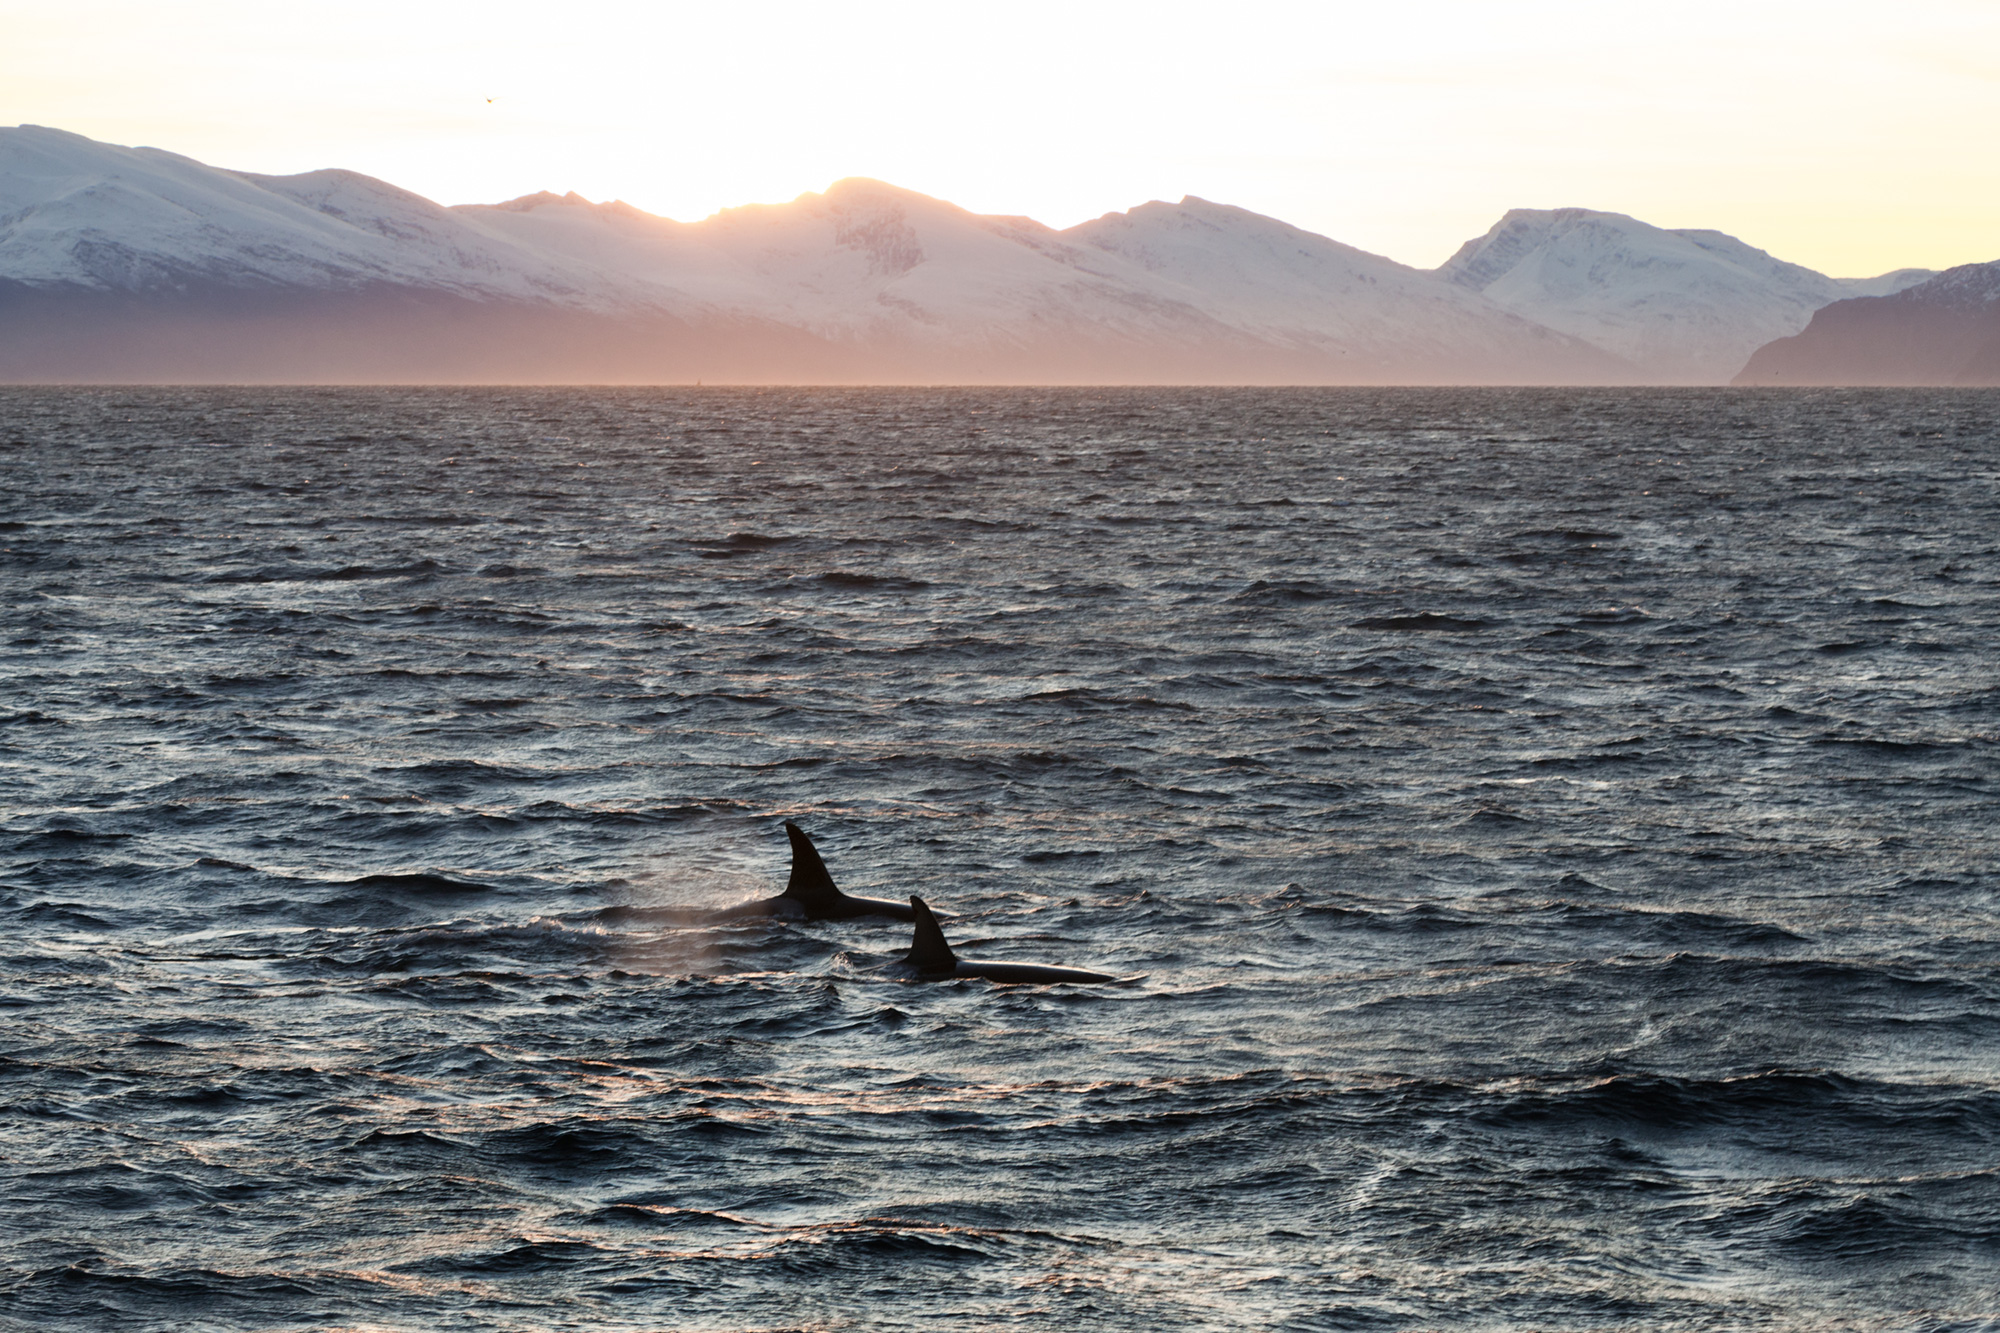 Two Orcas surfacing in the ocean